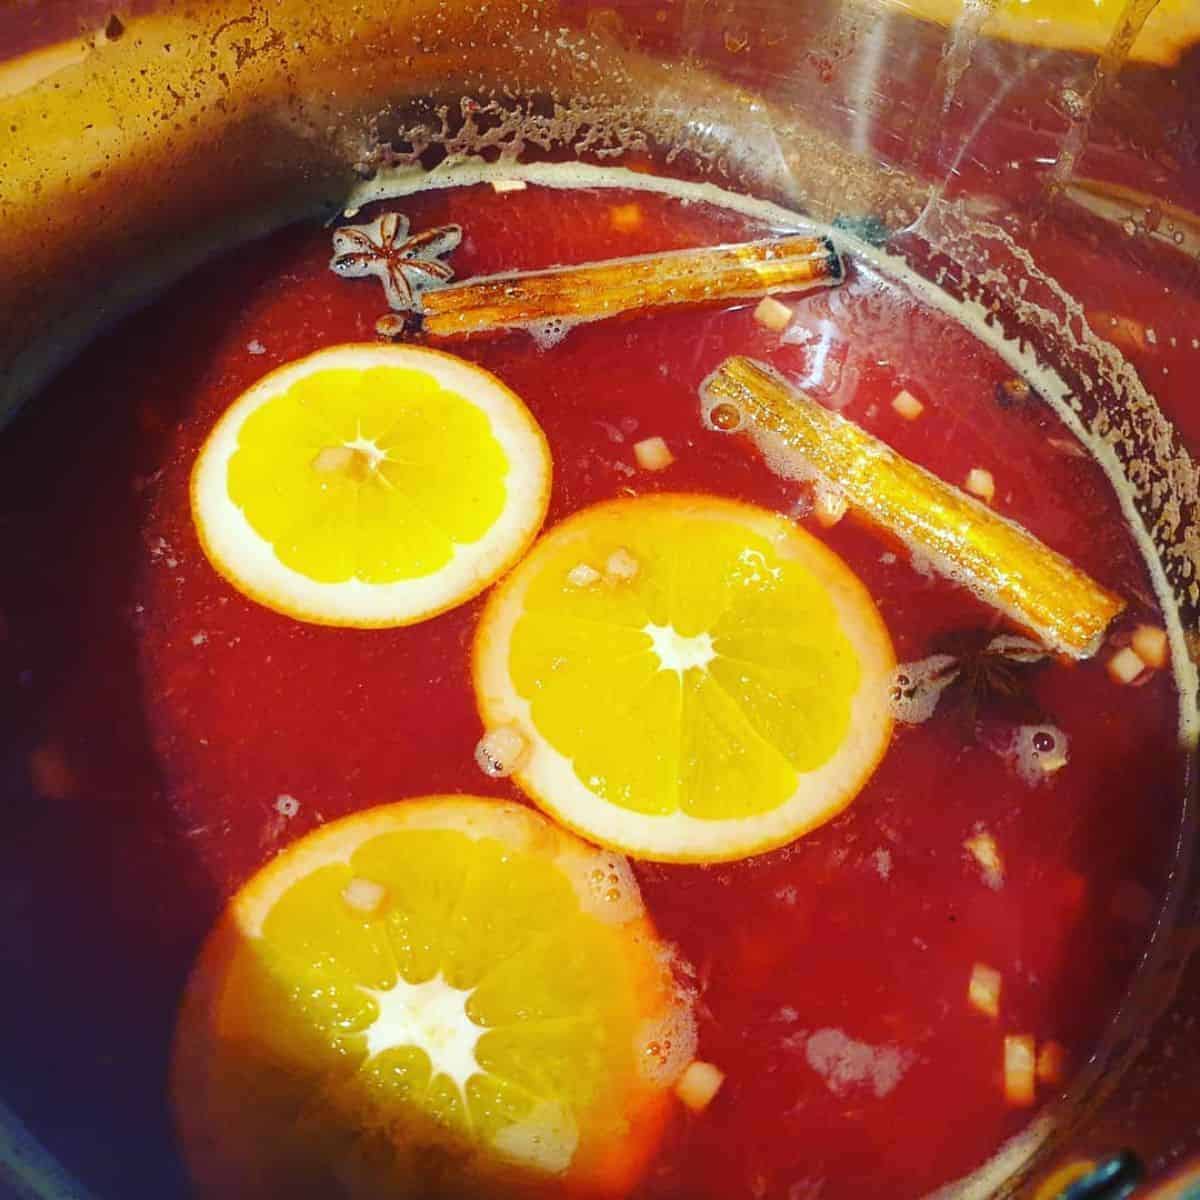 Christmas spiced drink mixture with lemon, star anise, and cinnamon stick